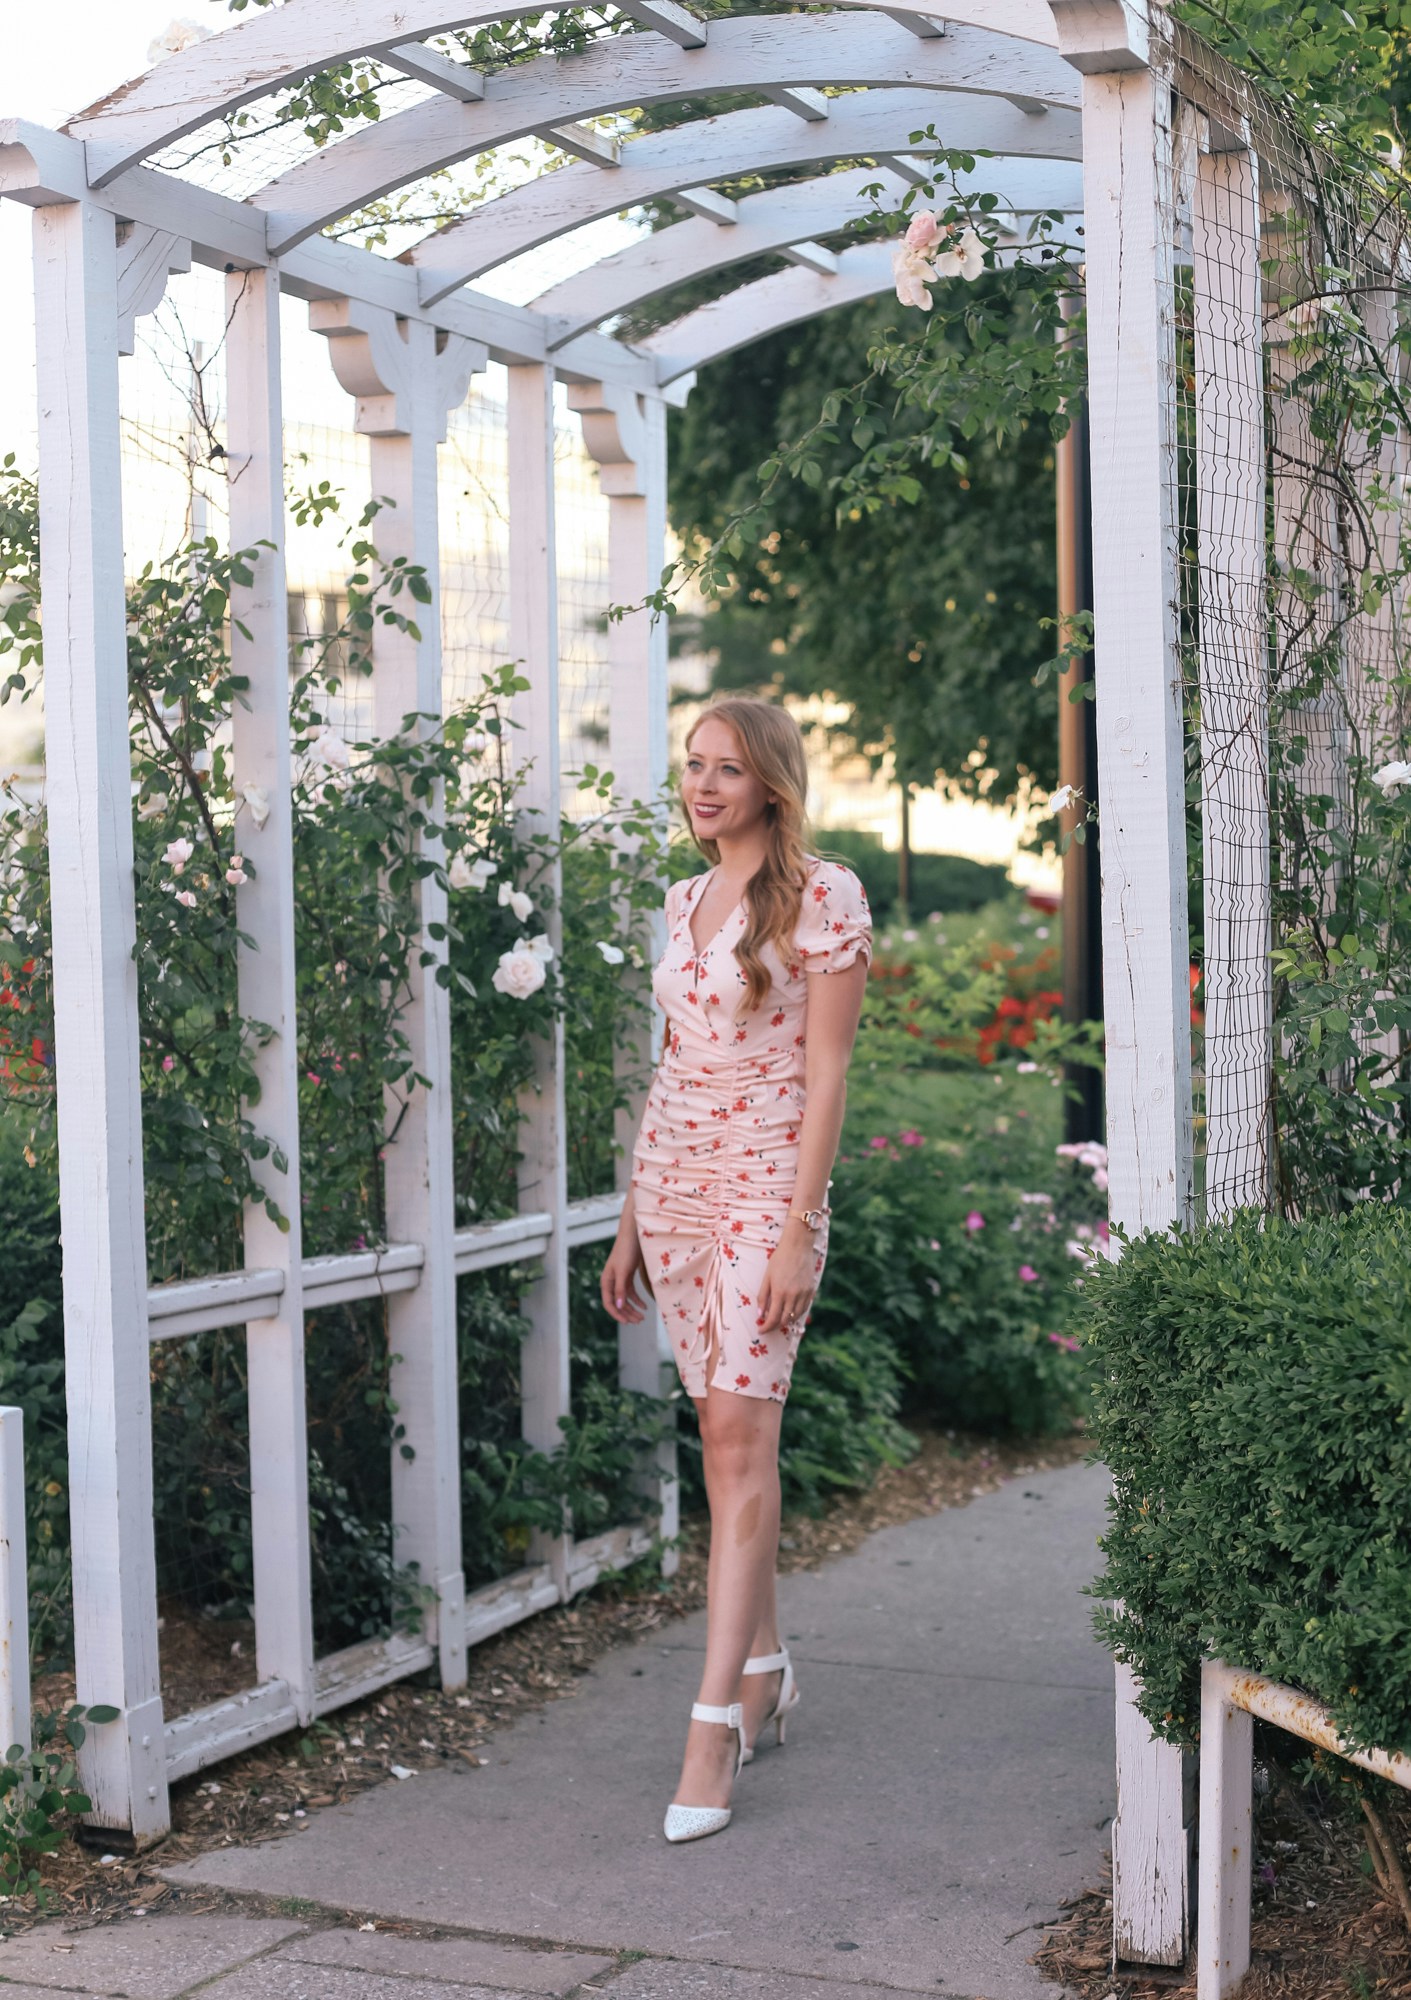 J.O.A. Cinch Front Dress : a dainty rose print dress for under $100.